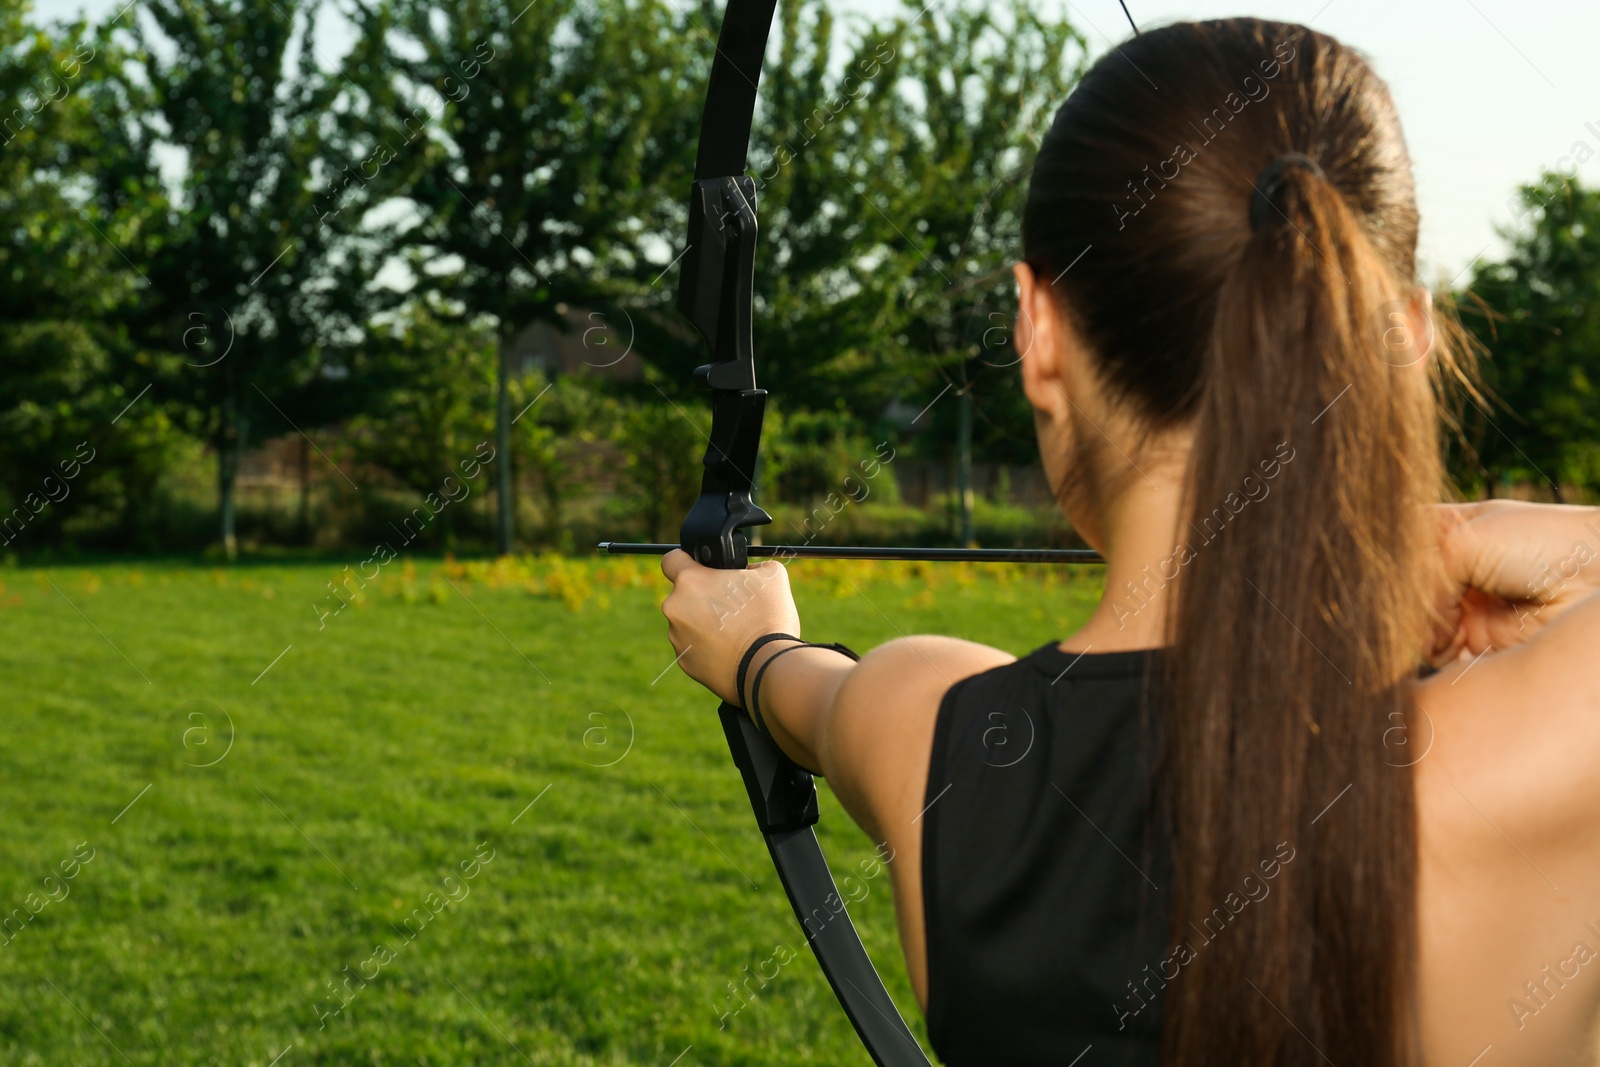 Photo of Woman with bow and arrow practicing archery in park, back view